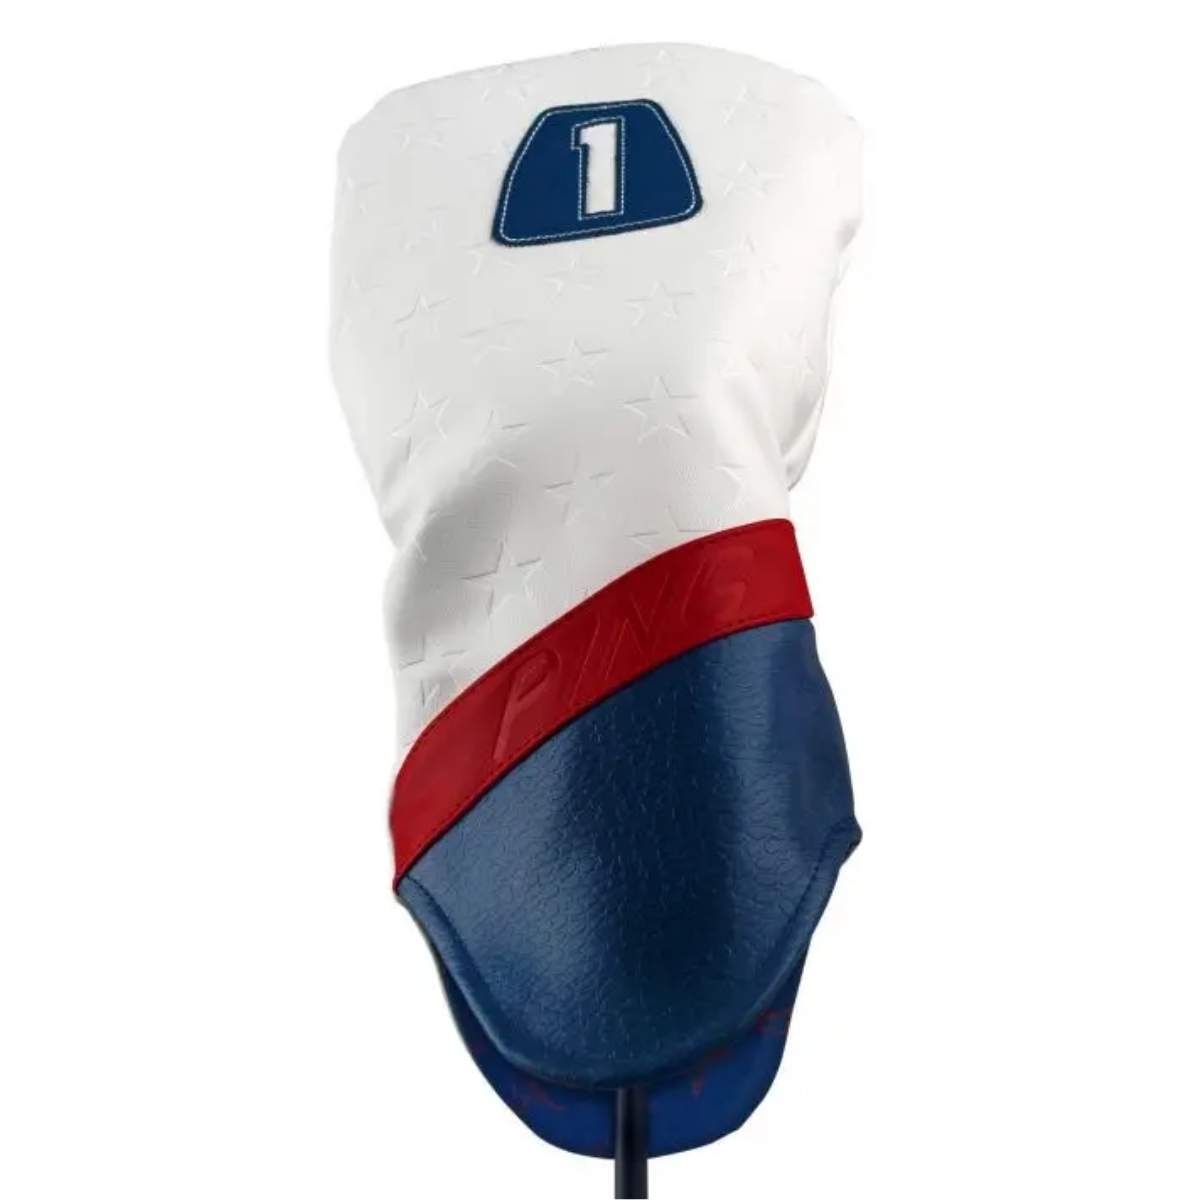 PING Stars & Stripes Driver Headcover